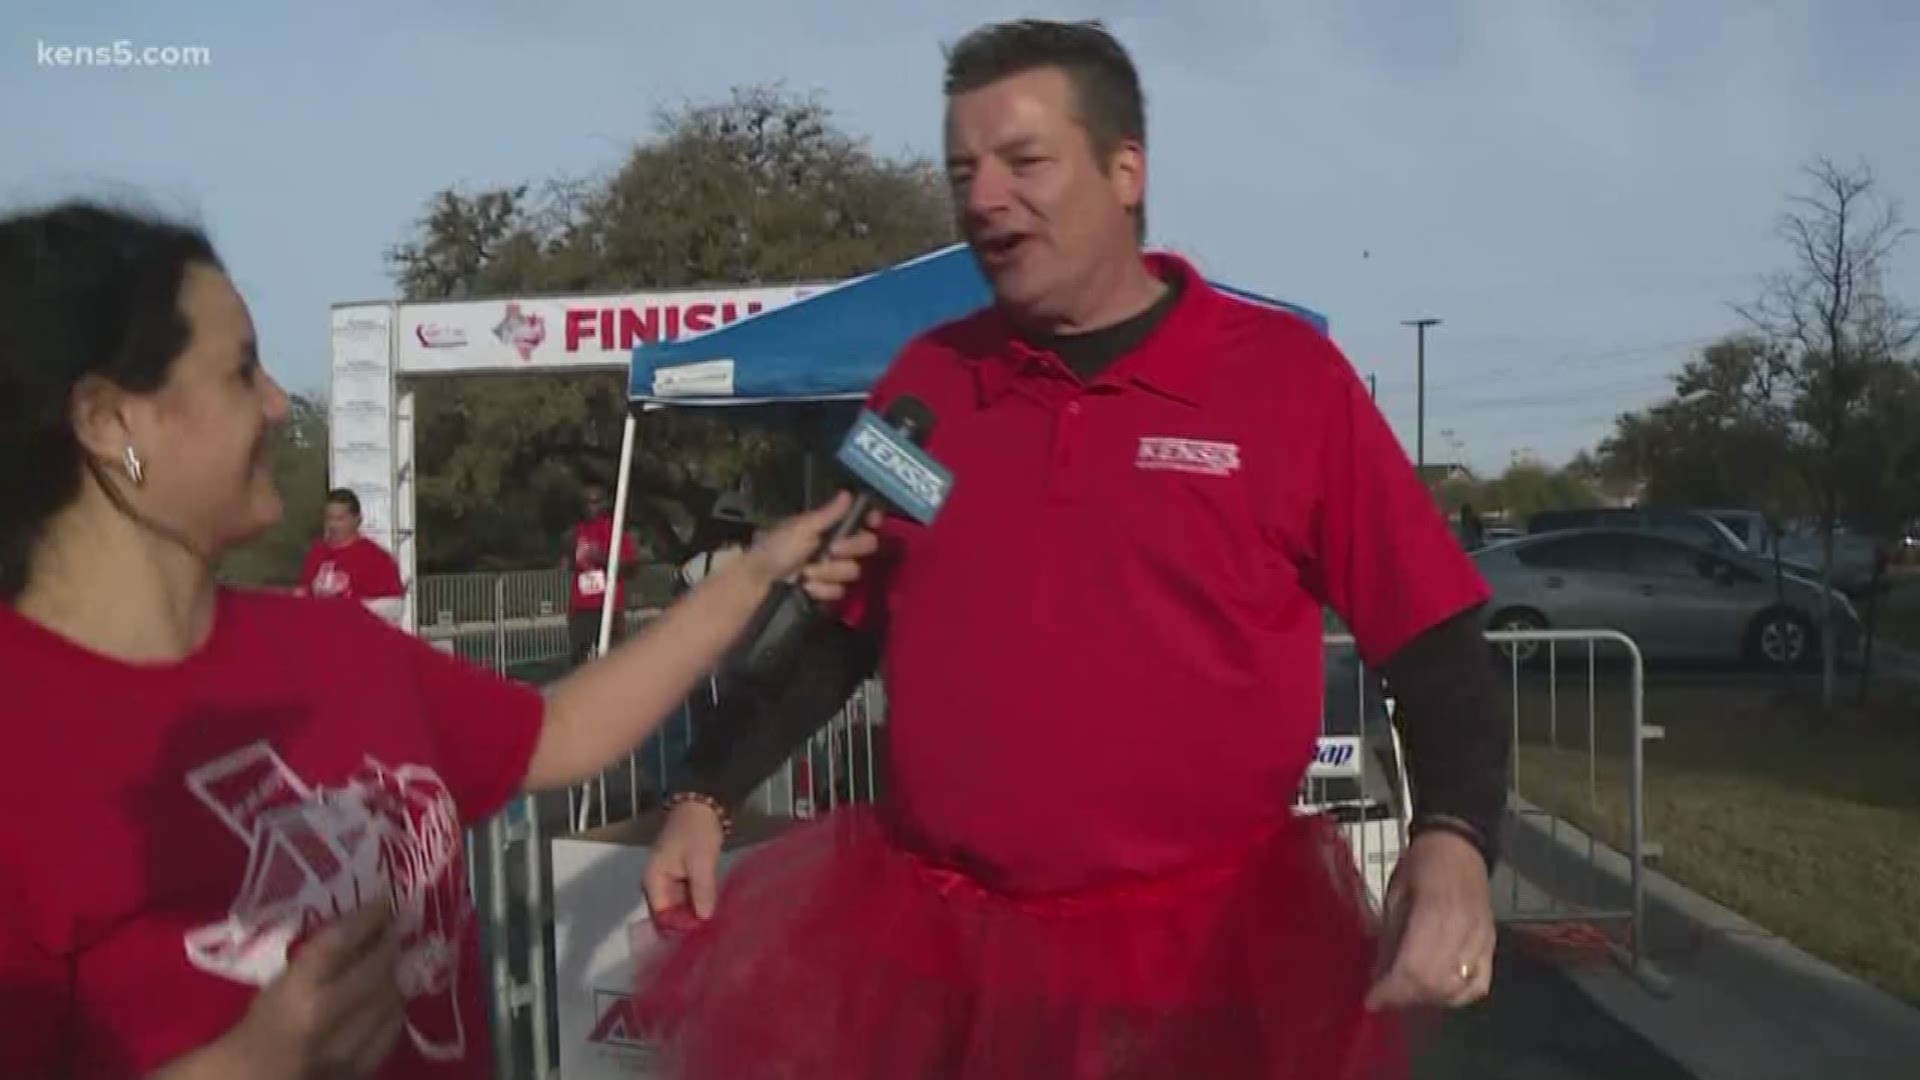 KENS 5's Bill Taylor and Erica Zucco report from the finish line at the Red Dress 5K Fun Run!